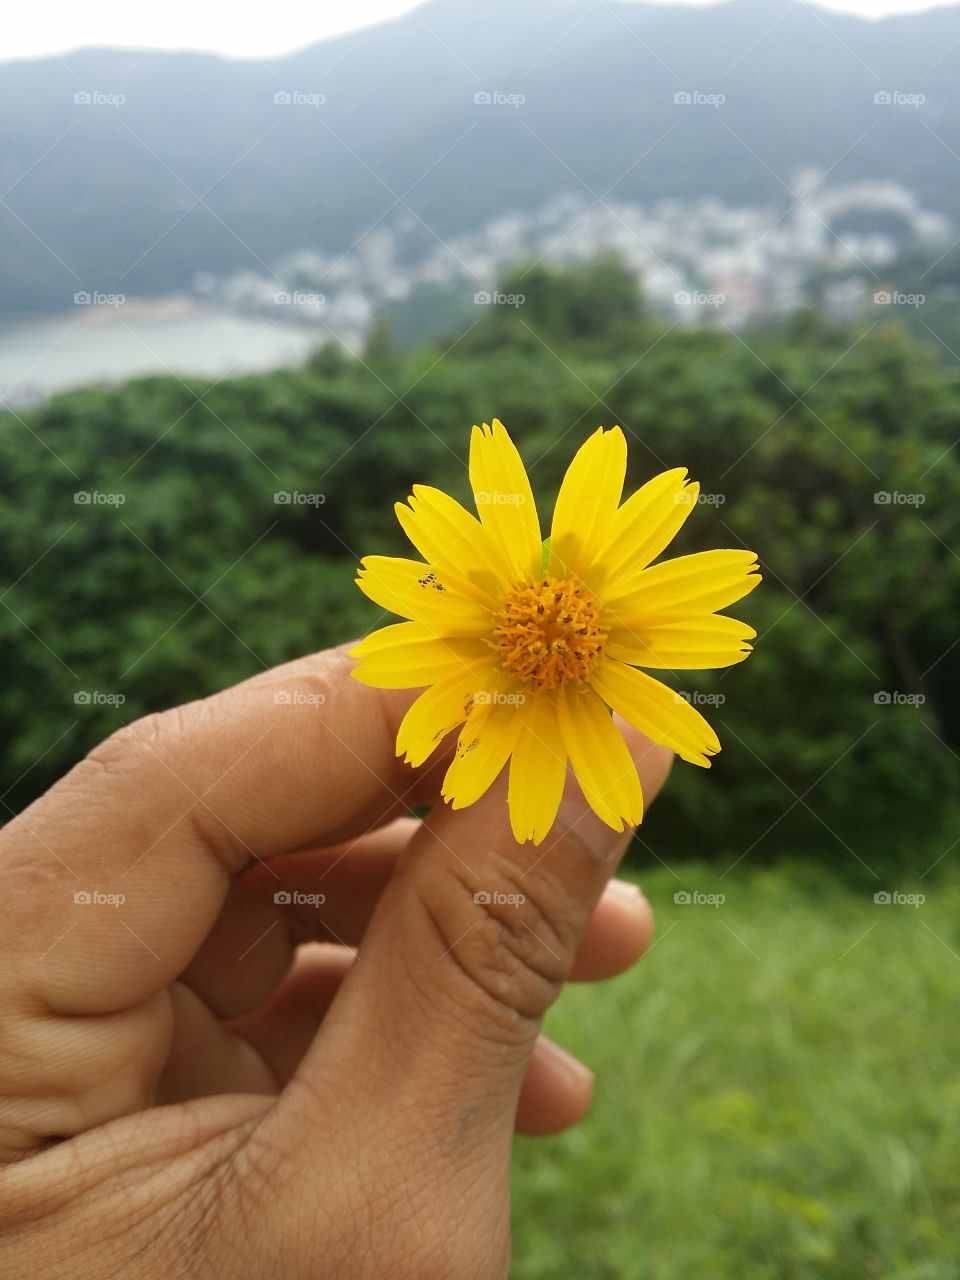 i usually like to take picture of flowers  since i like flowers i took this picture using my phone. the place is in Adventist College (HKAC) hong kong. good collage but really far to reach tooks 1hr from kwloon.